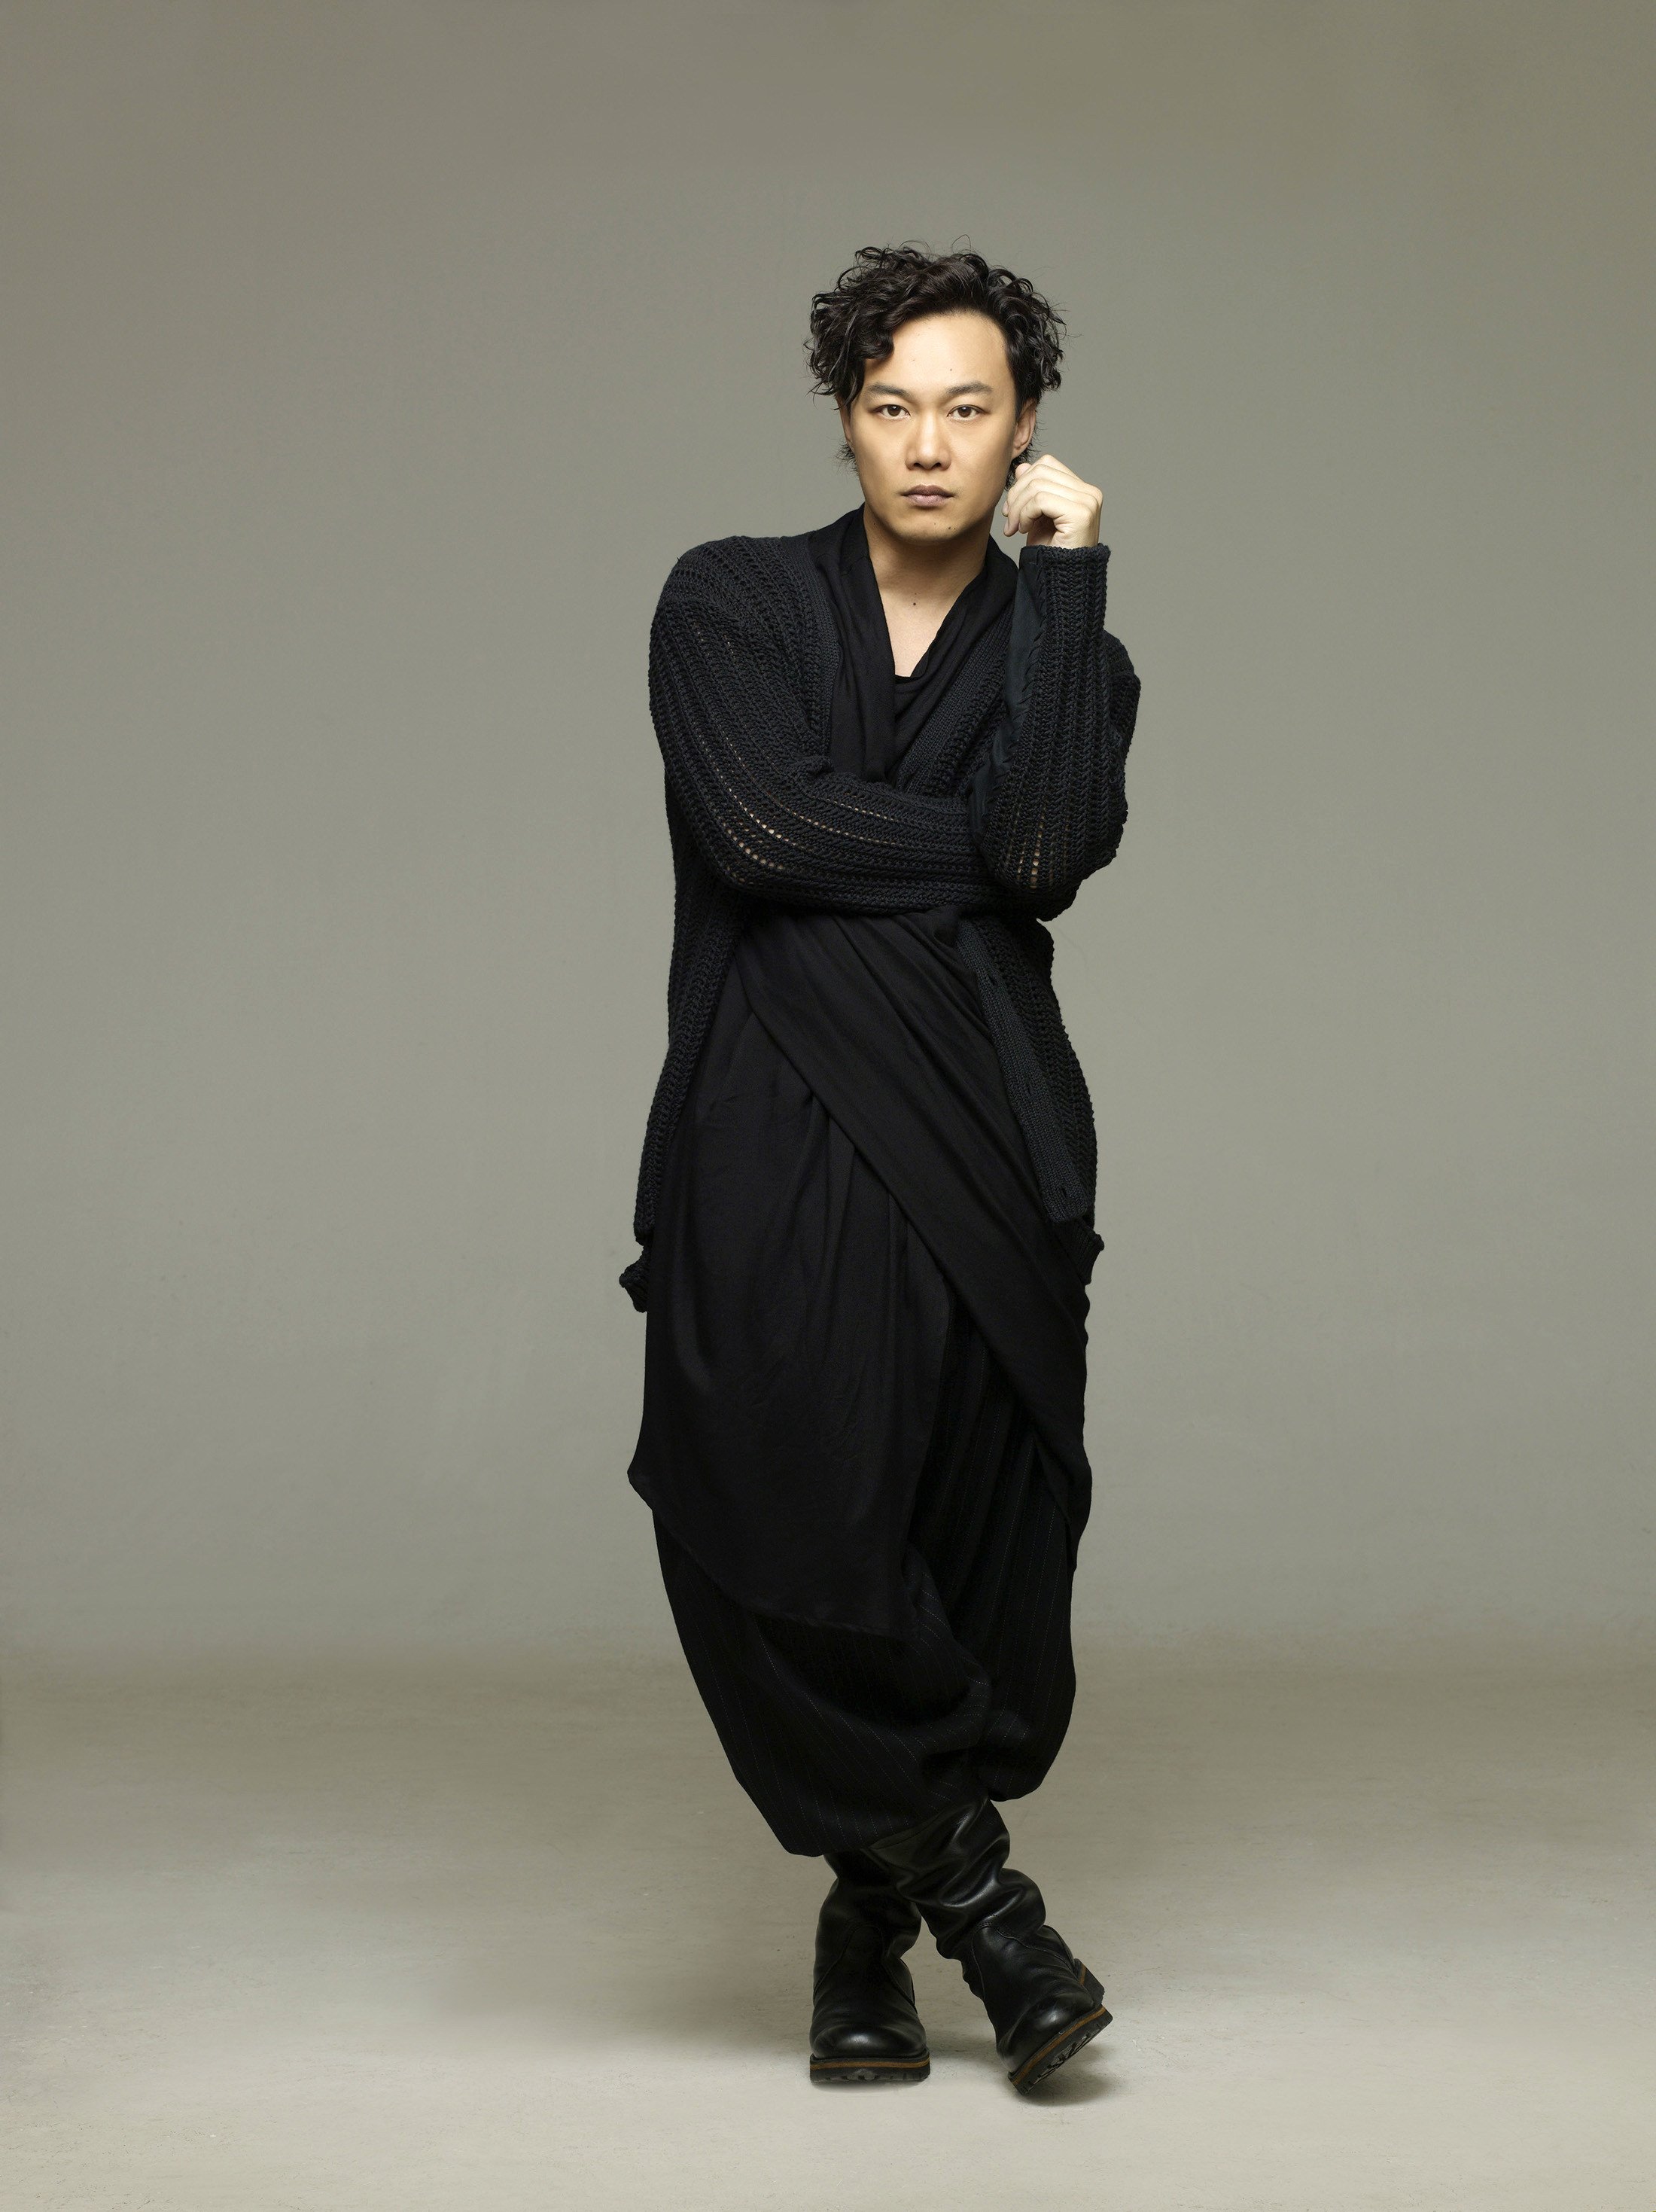 Hong Kong singer and actor Eason Chan remains one of Cantopop’s most influential figures. Photo: Handout